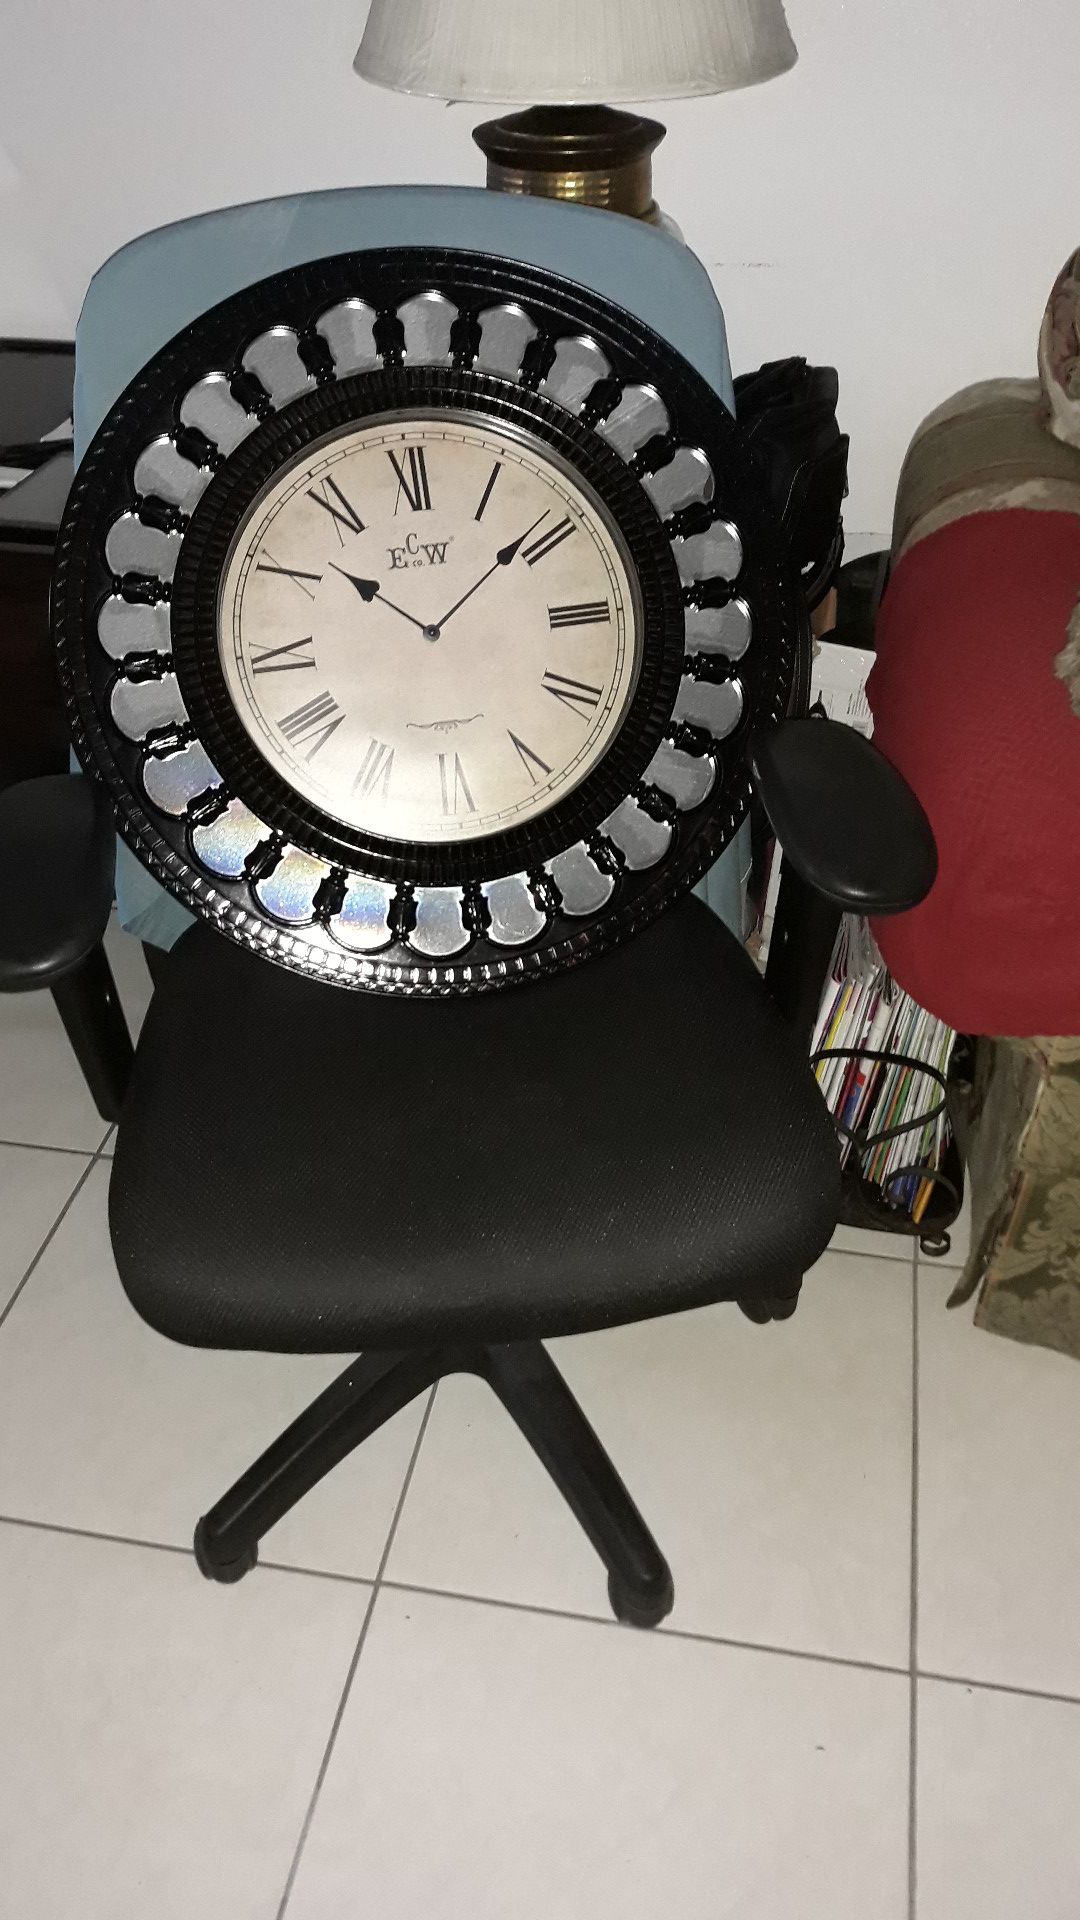 It is a black wall clock mirror with 23 mirrors around for $20.00.